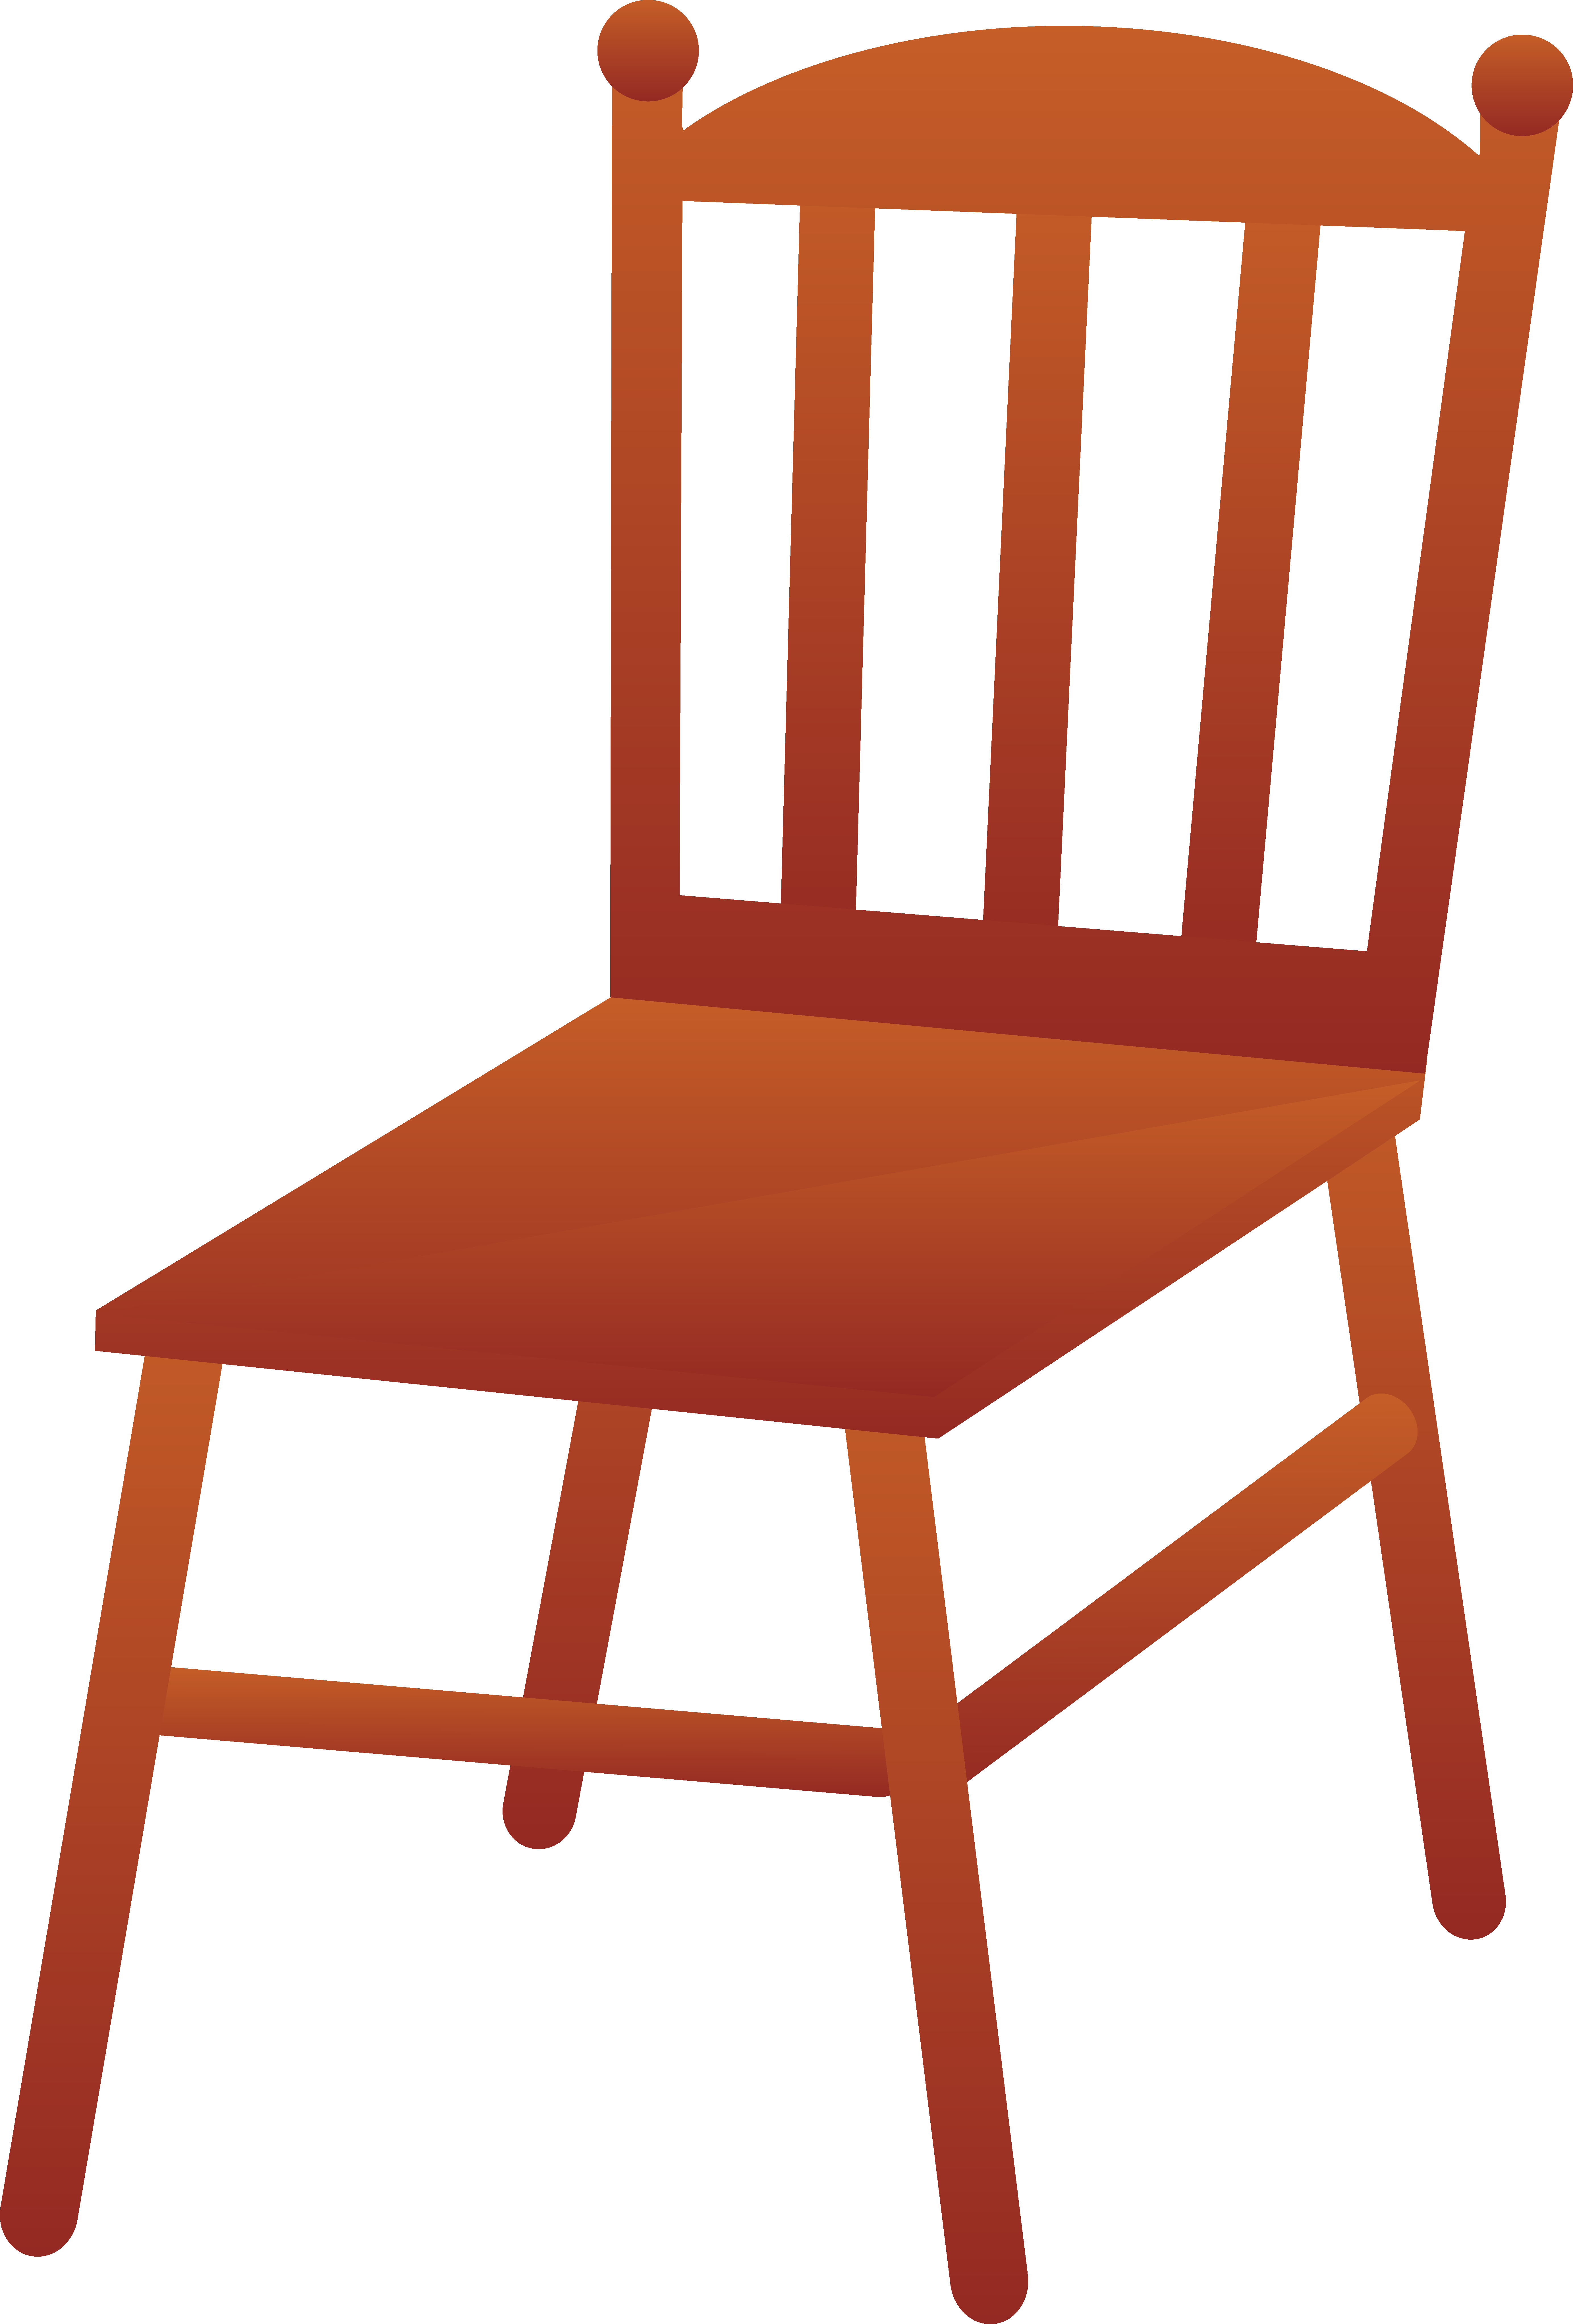 Free Outdoor Chair Cliparts, Download Free Outdoor Chair Cliparts png